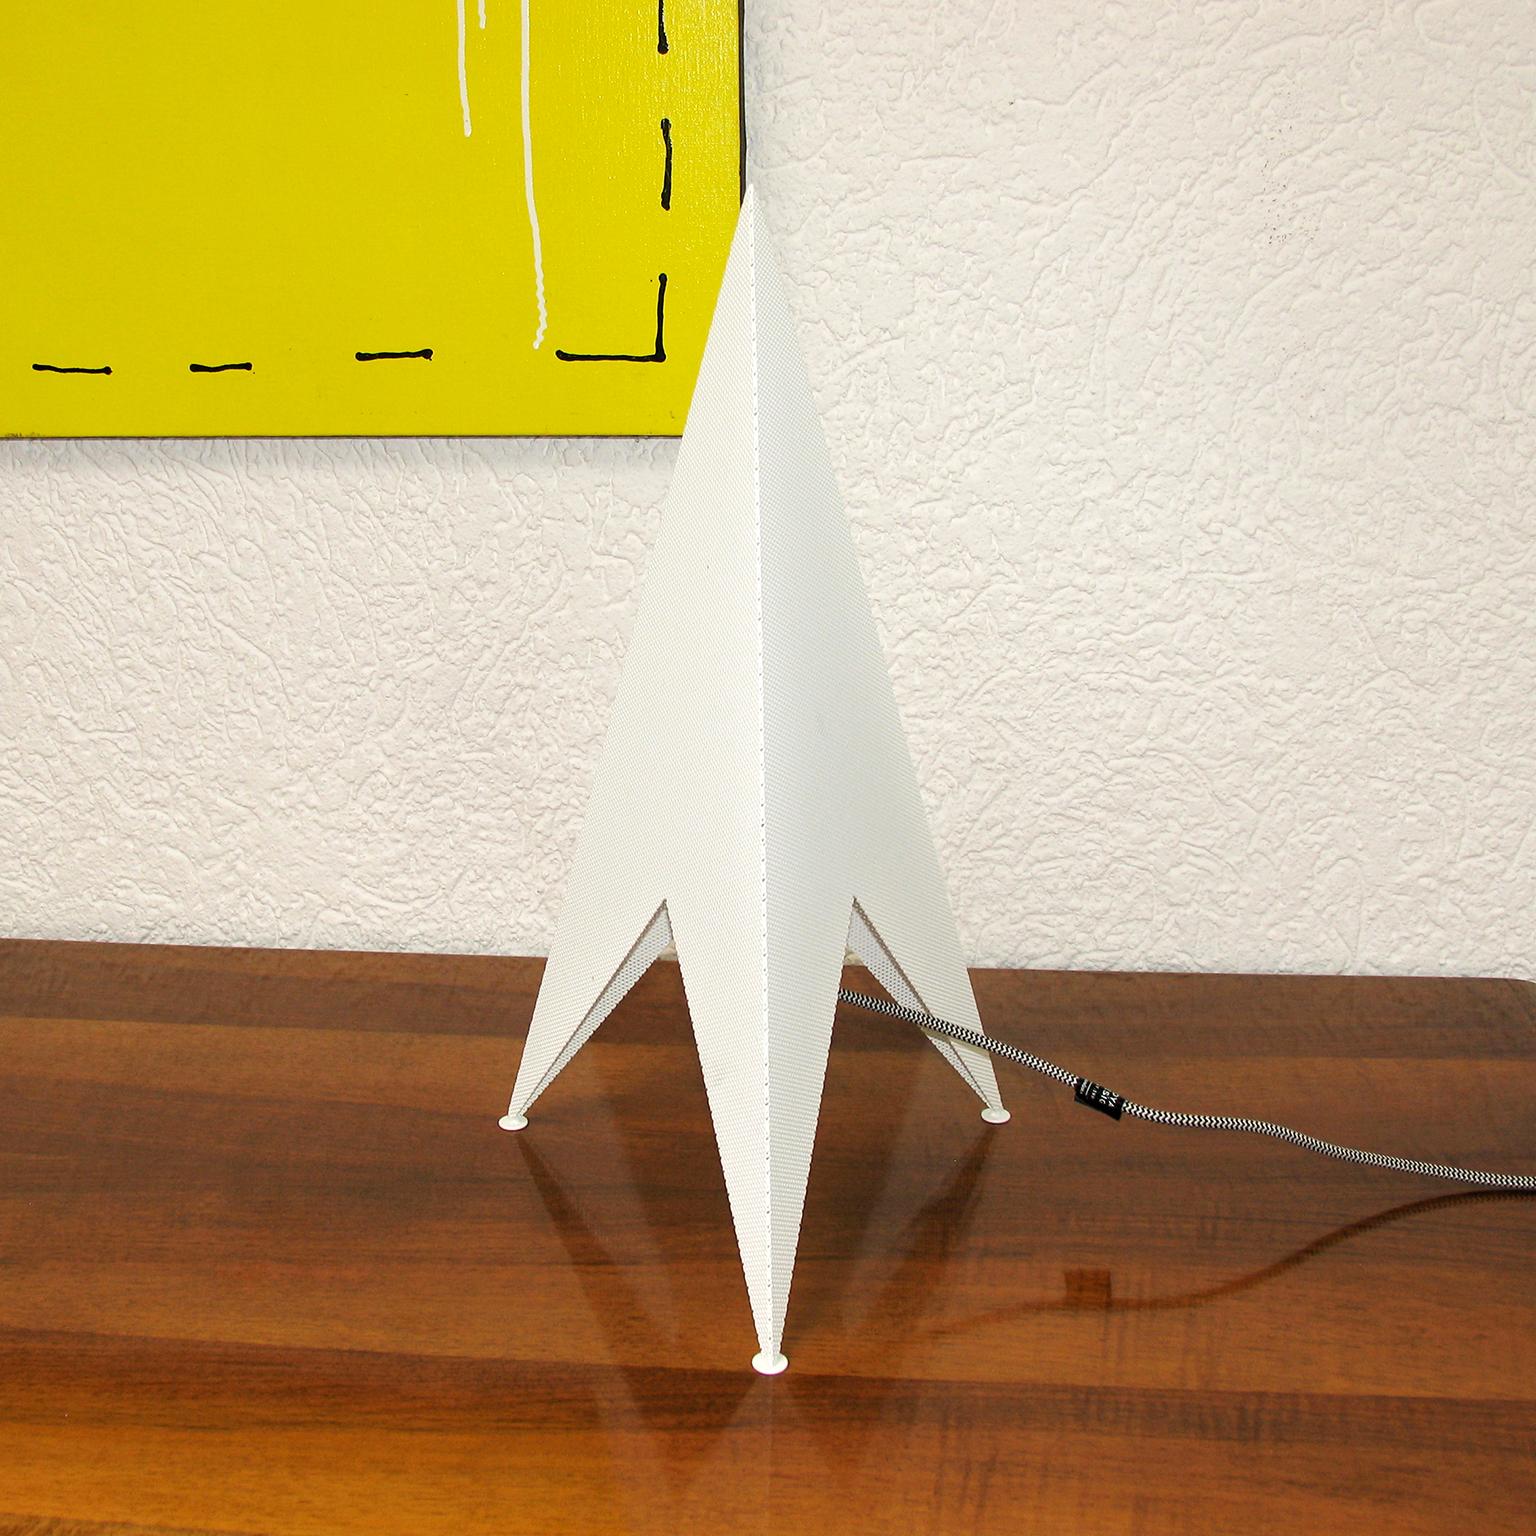 Perforated Metal Rocket Lamp, Designer Light, 20 in High In Excellent Condition For Sale In Bochum, NRW